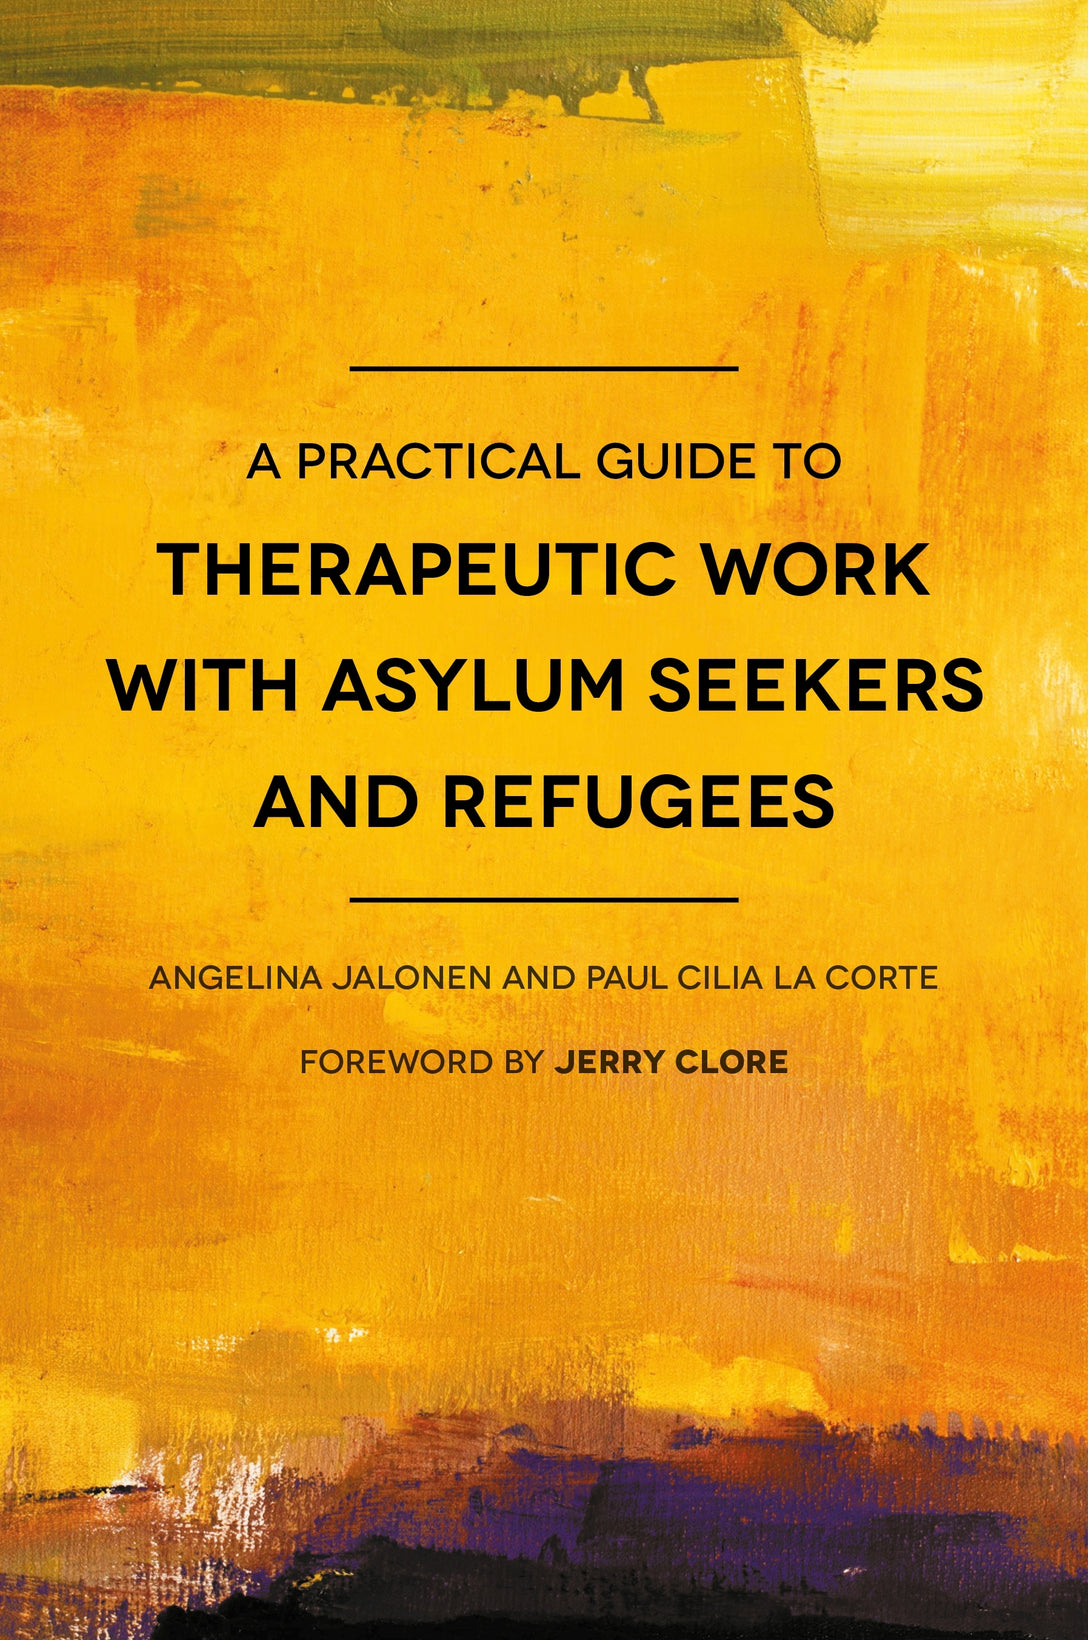 A Practical Guide to Therapeutic Work with Asylum Seekers and Refugees by Paul Cilia La Cilia La Corte, Angelina Jalonen, Jerry Clore